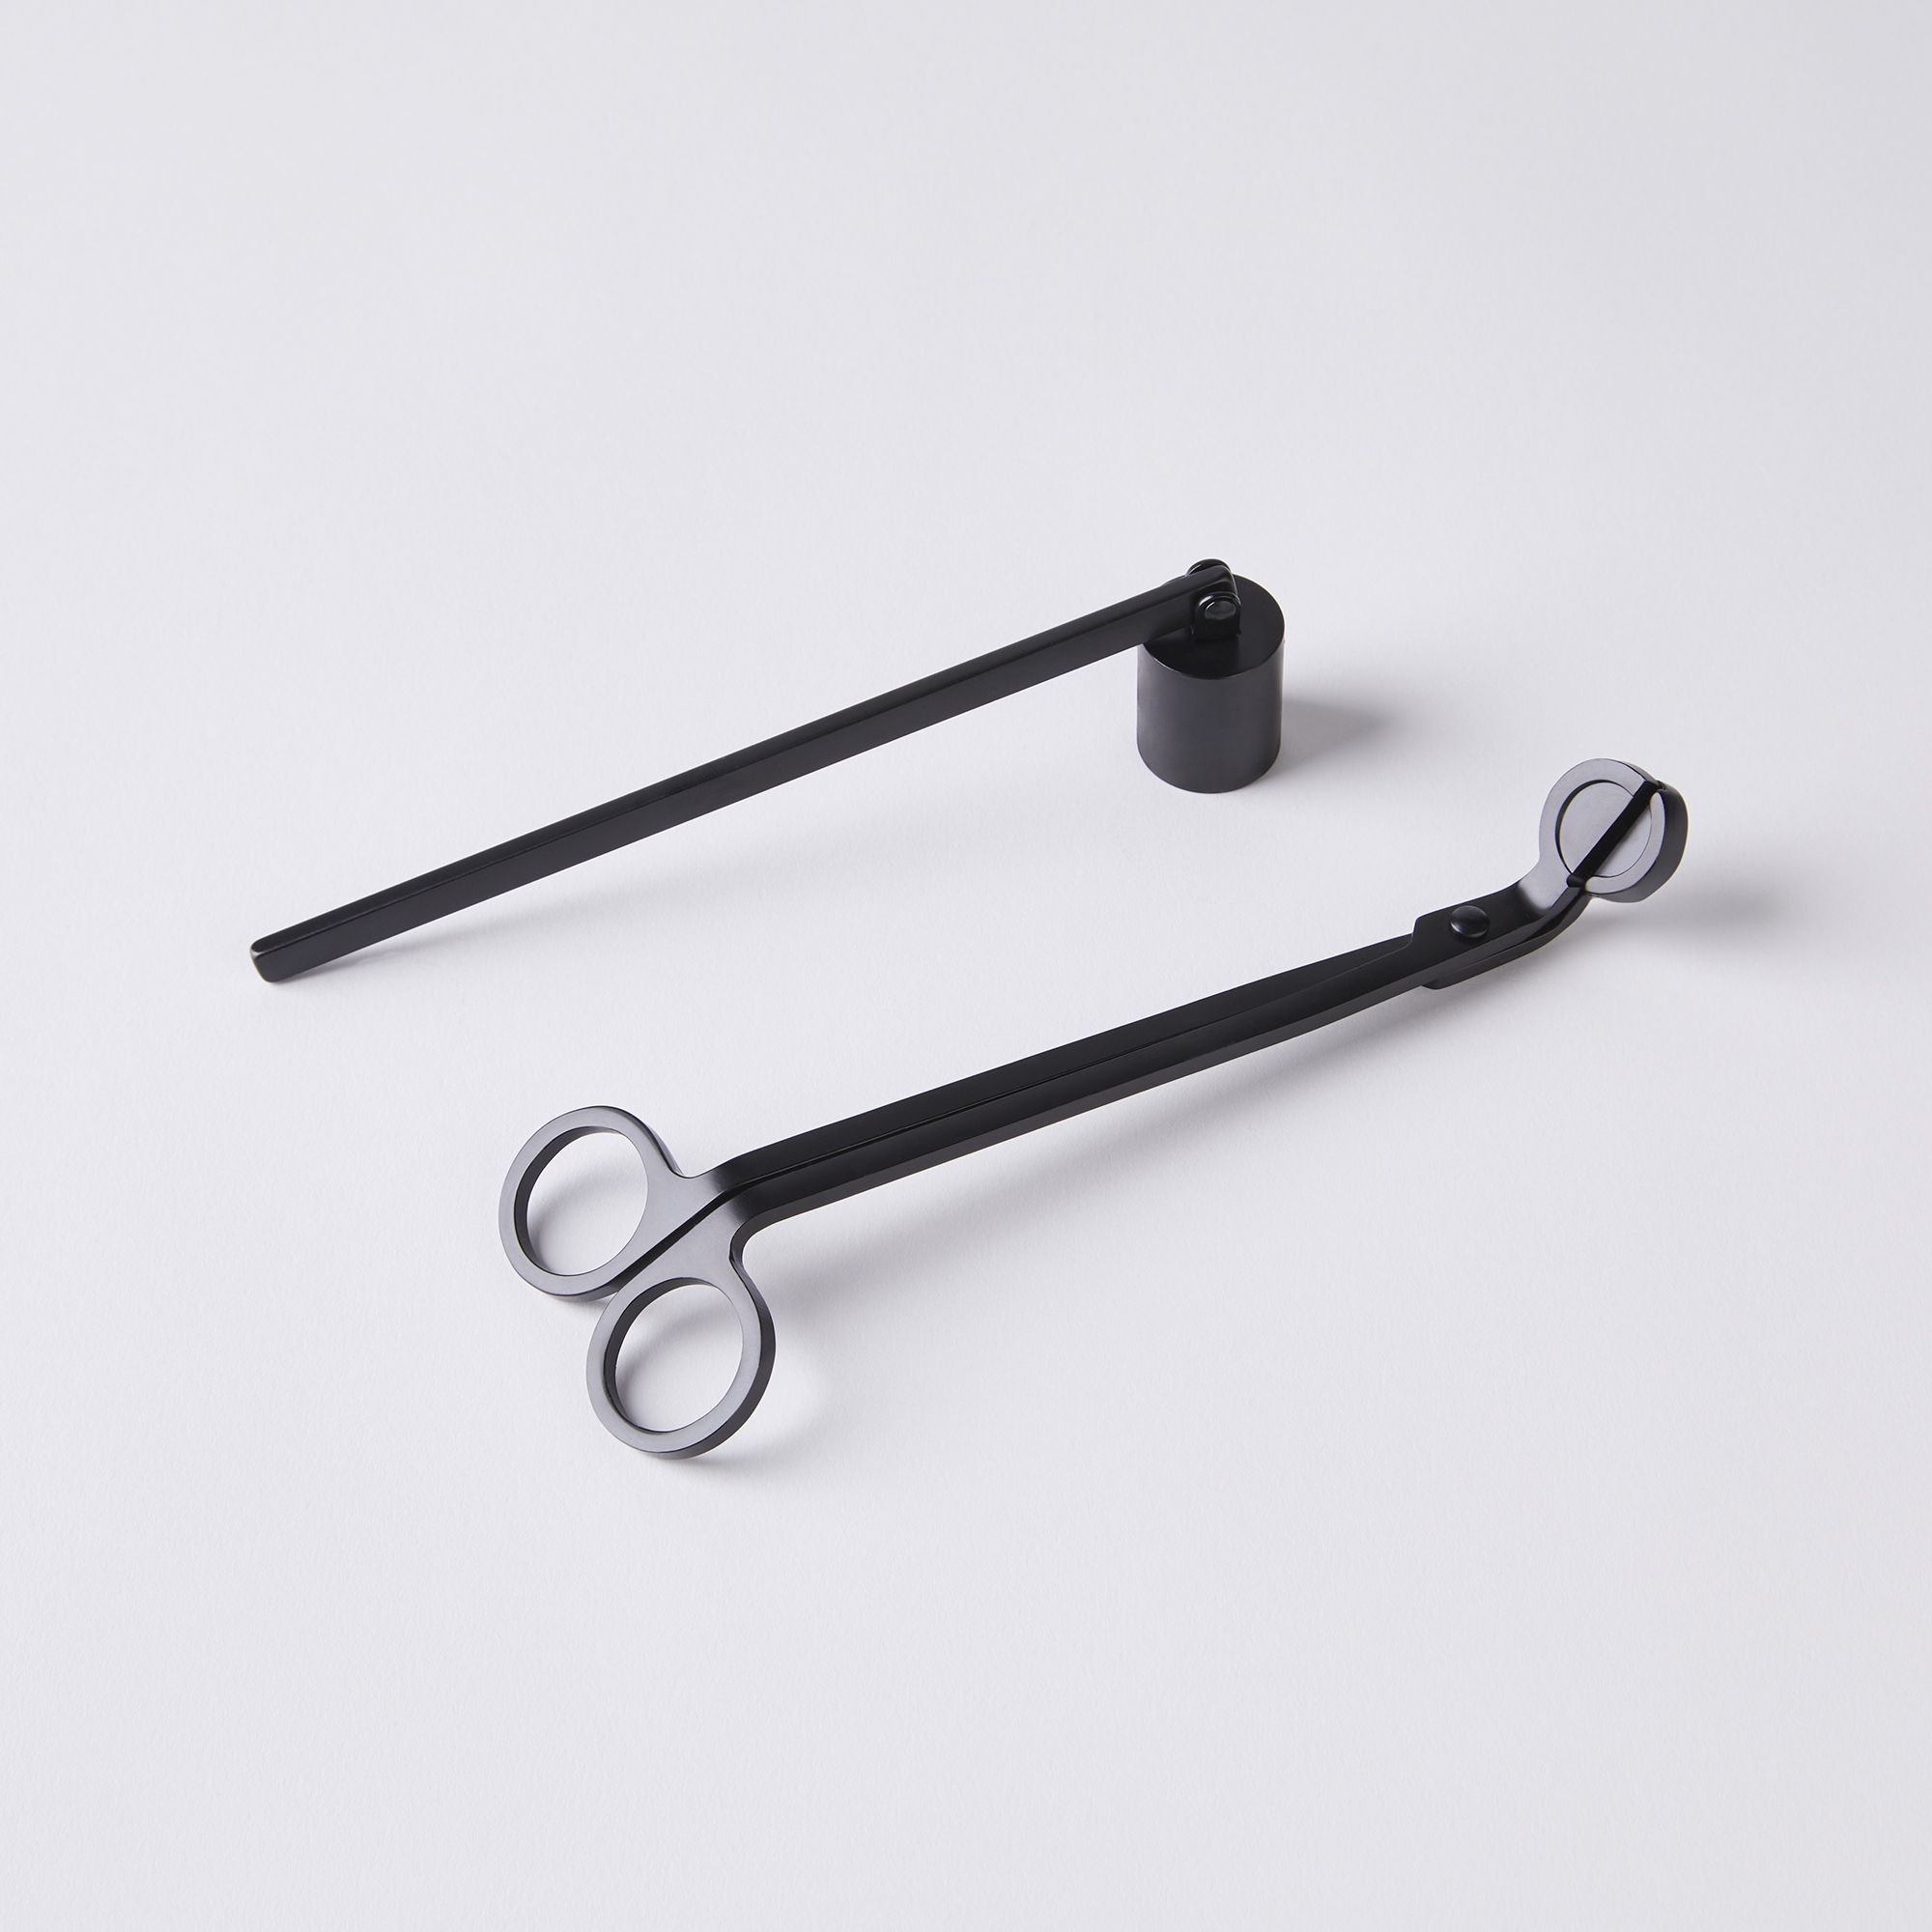 Candle Snuffer & Wick Trimmer on Food52